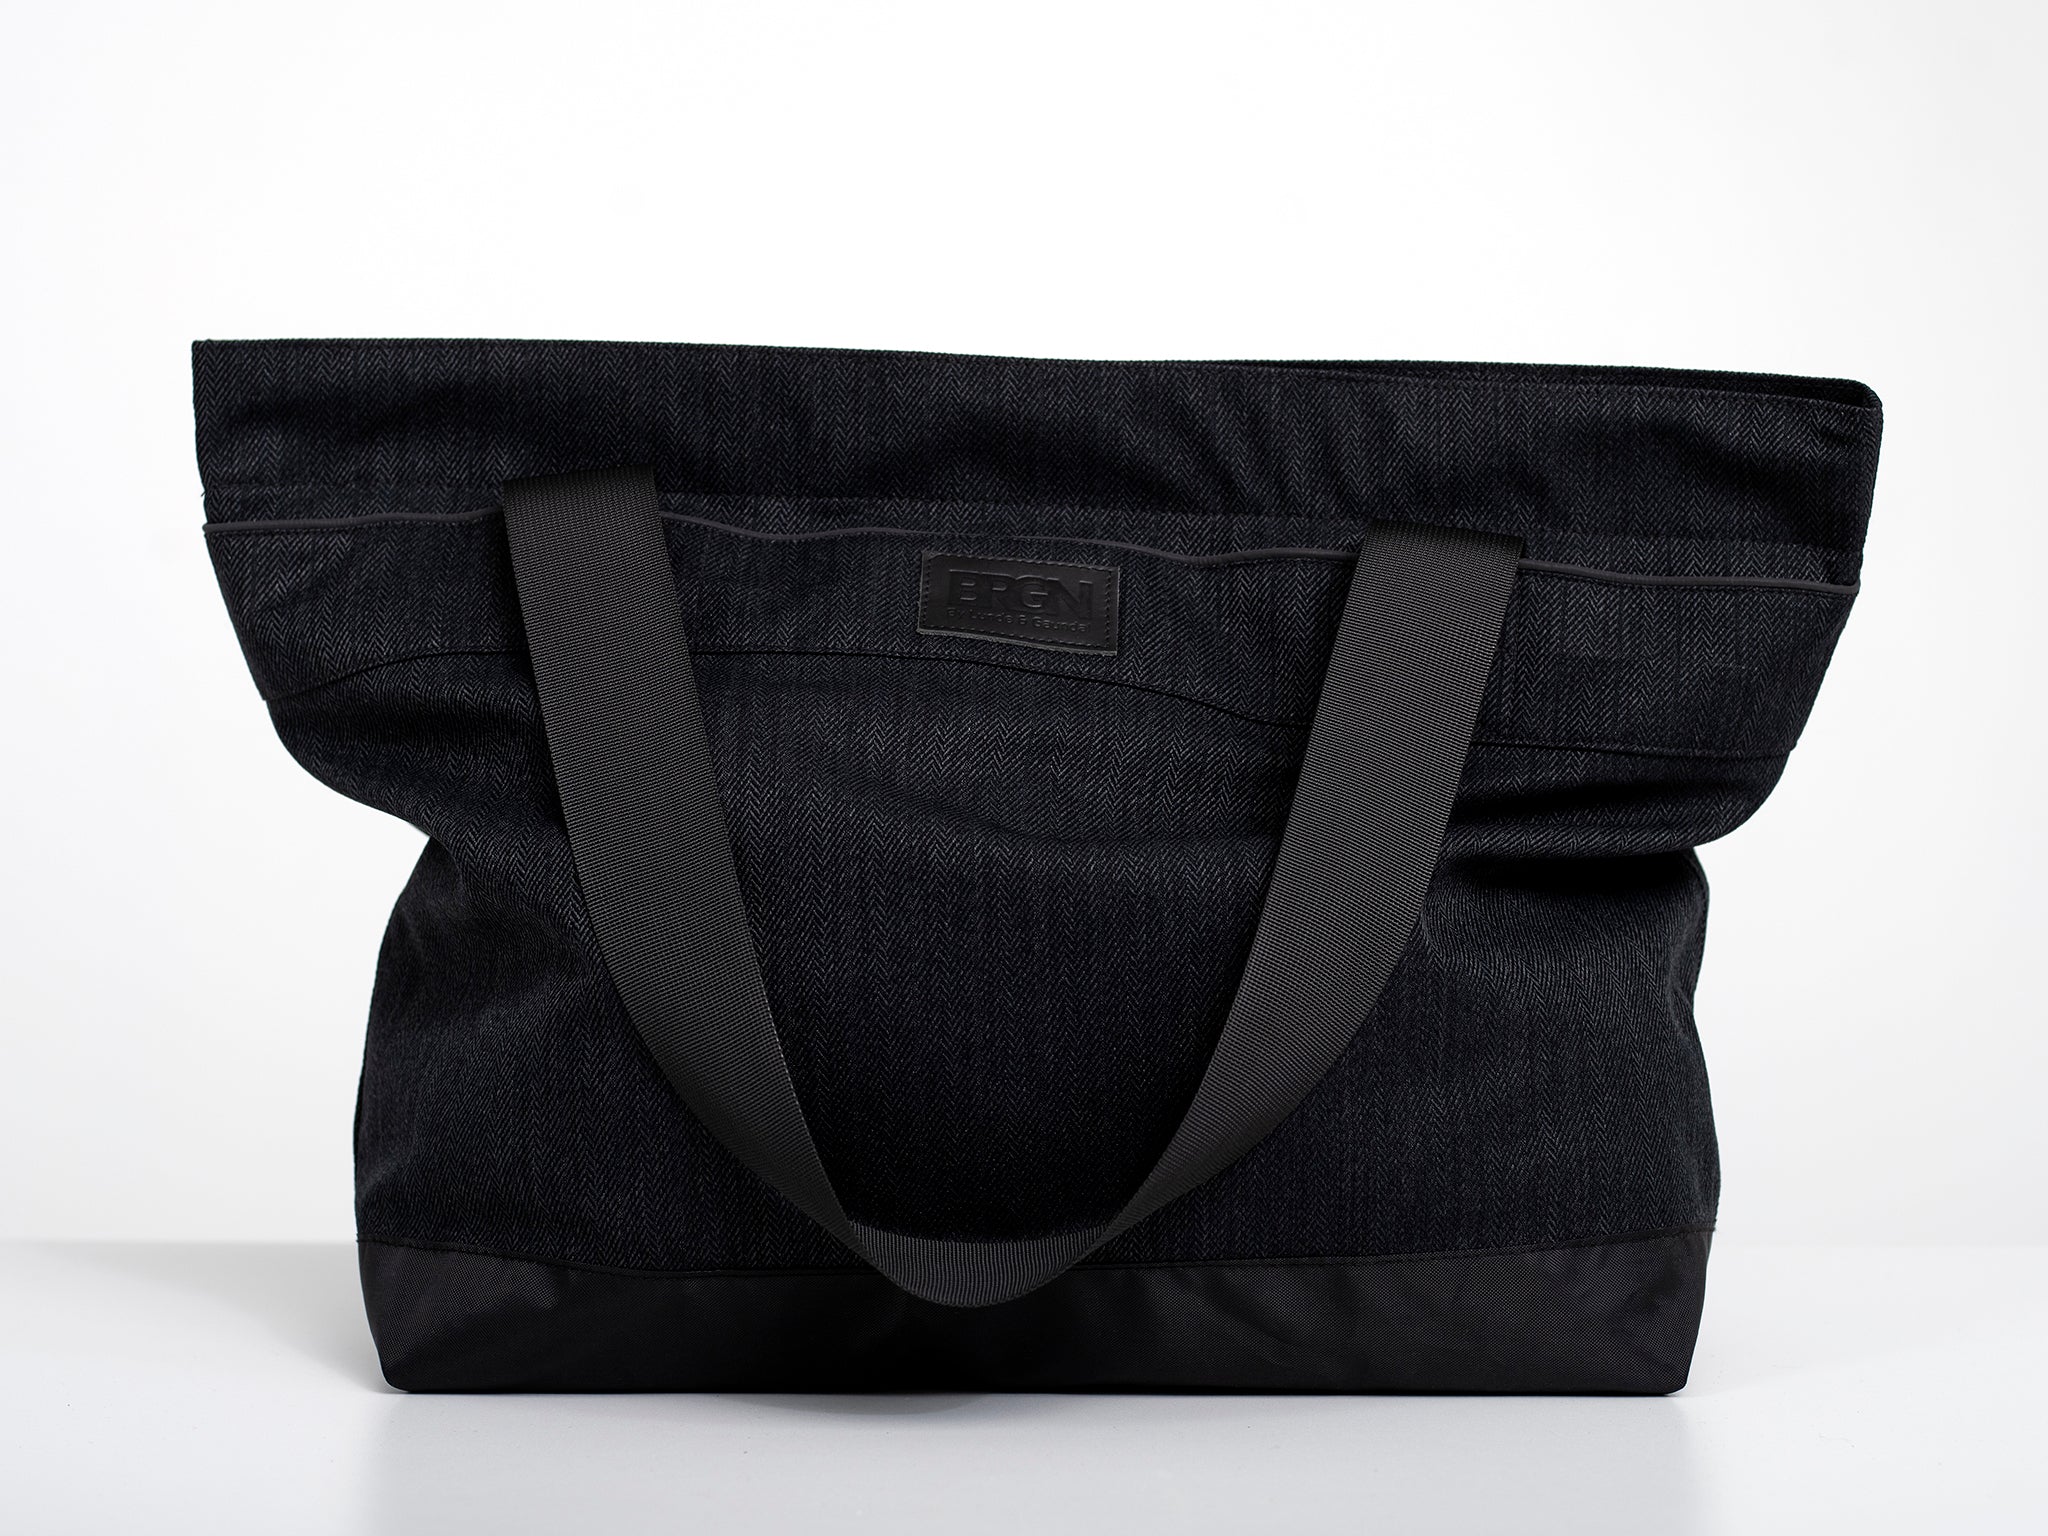 BRGN by Lunde & Gaundal Shopper Bag Accessories 097 Black Tweed